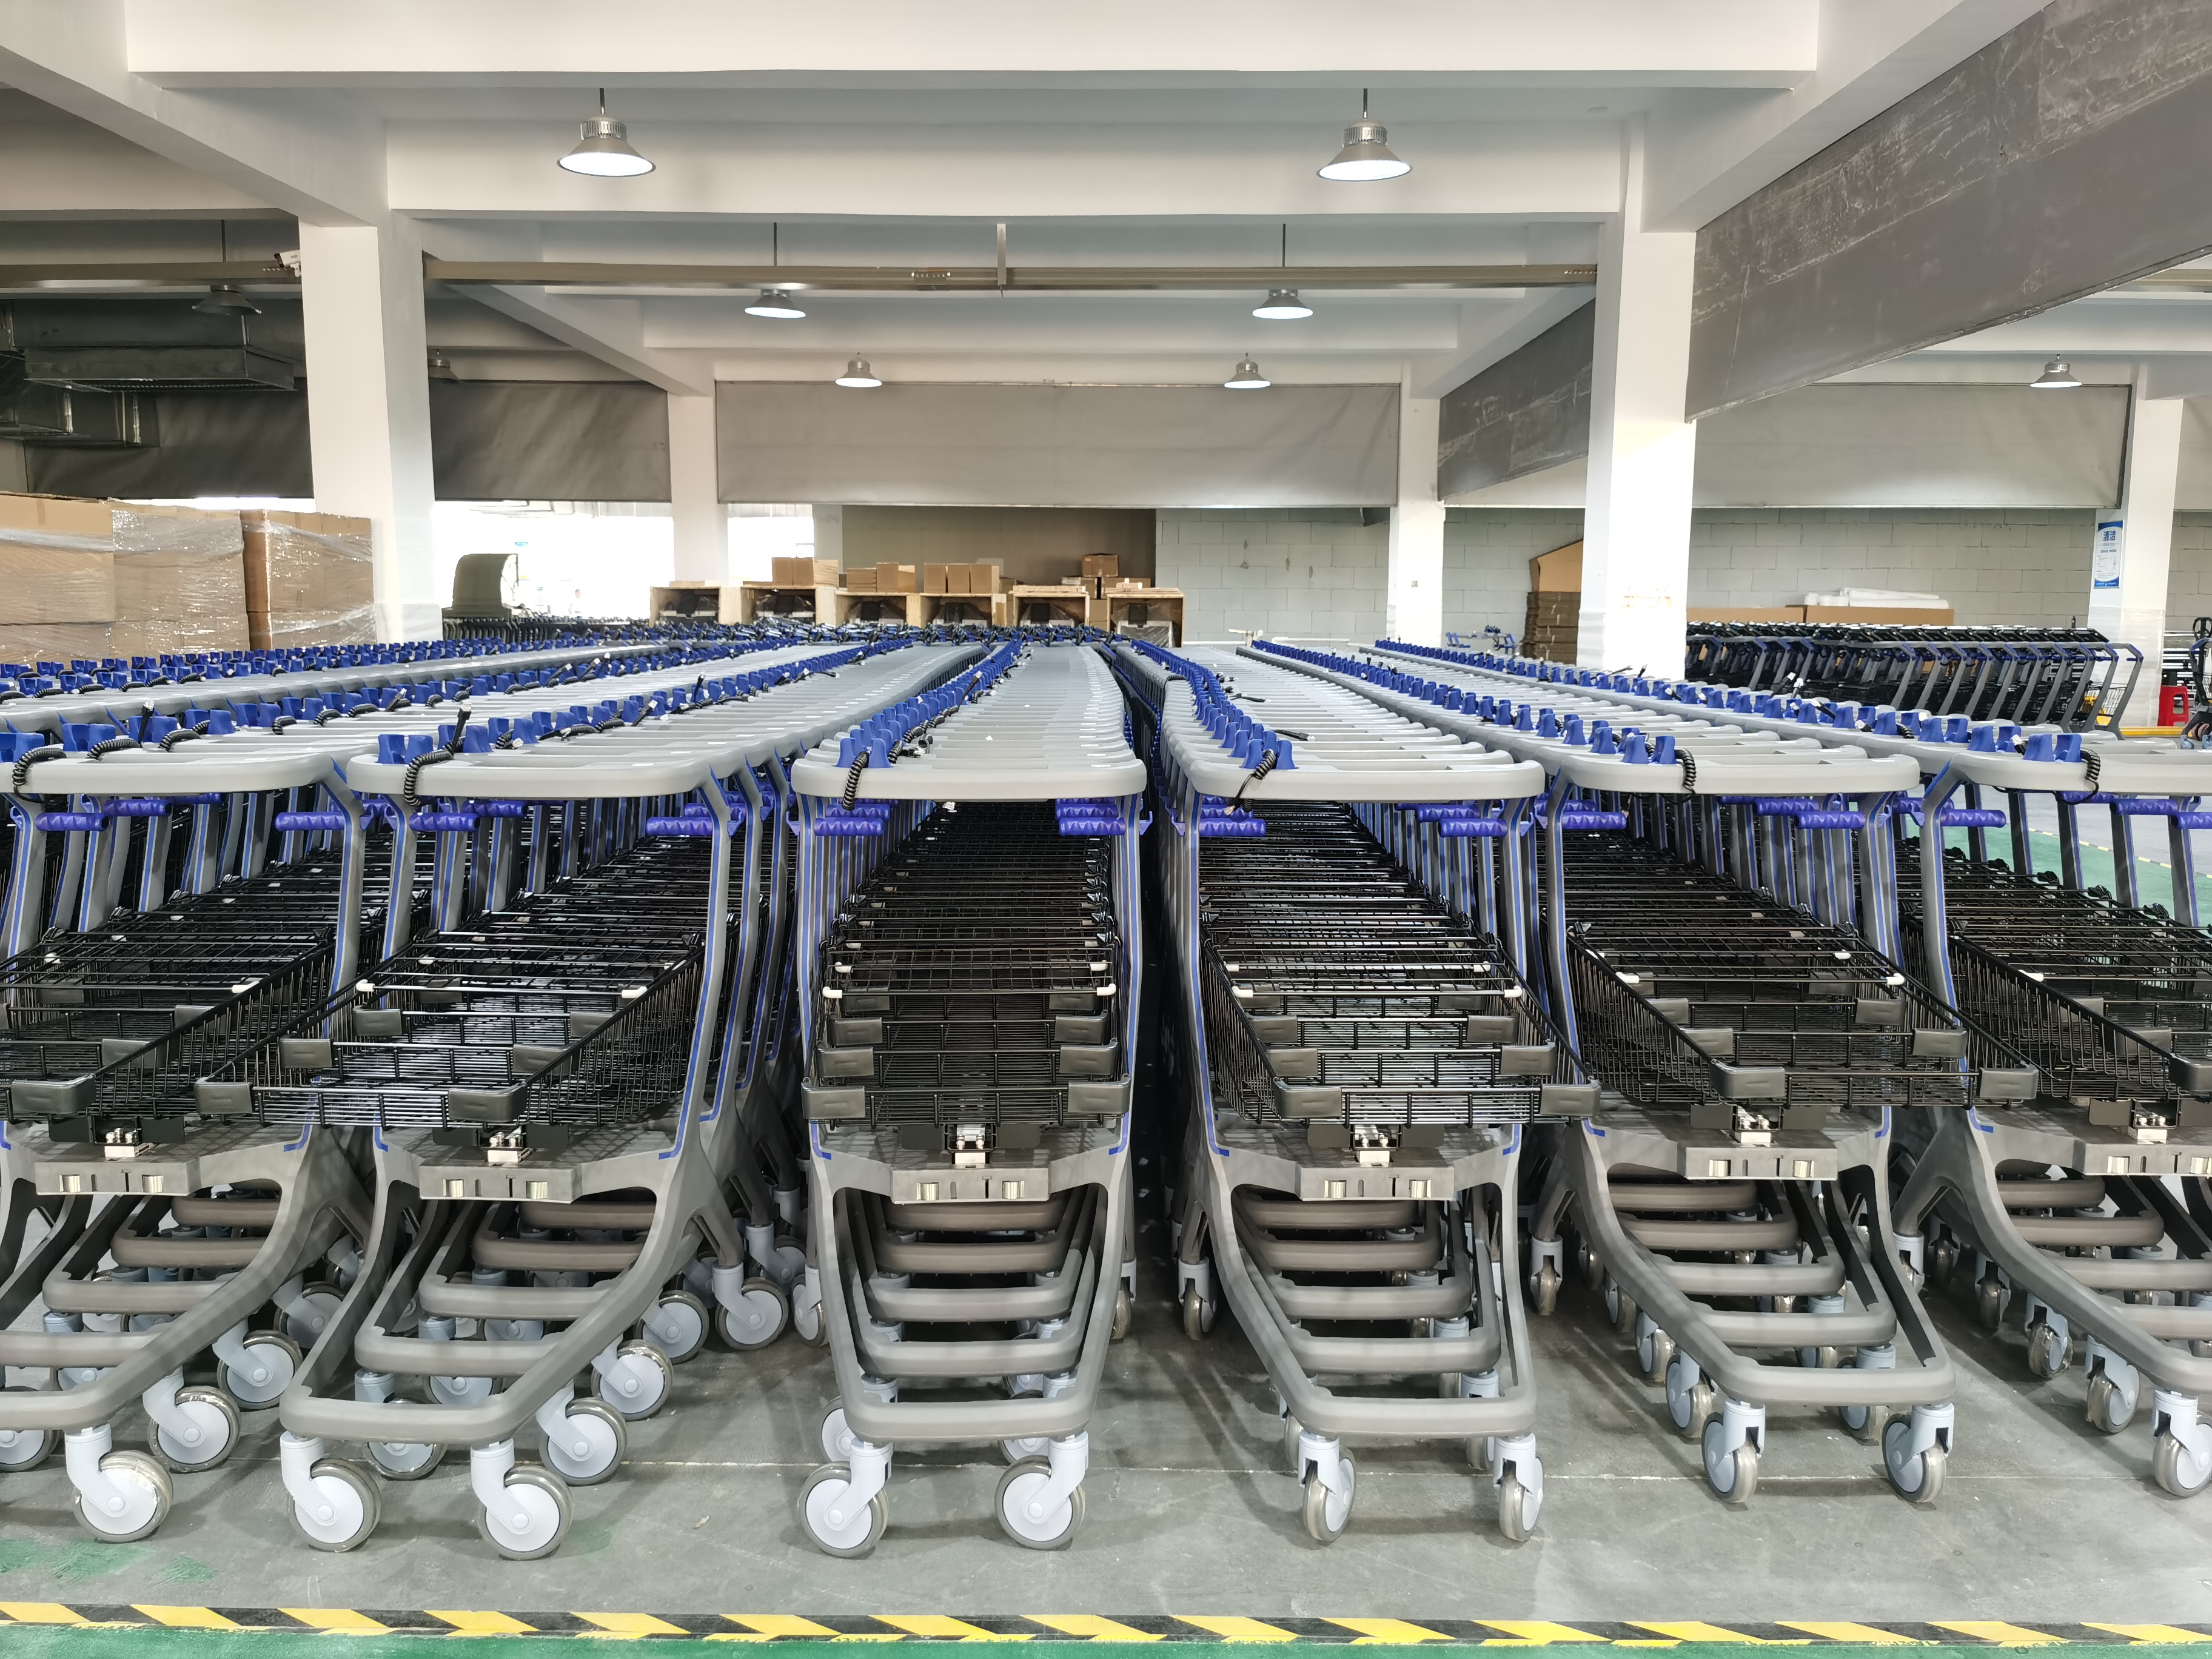 5 advantages of automated shopping carts over ordinary shopping carts